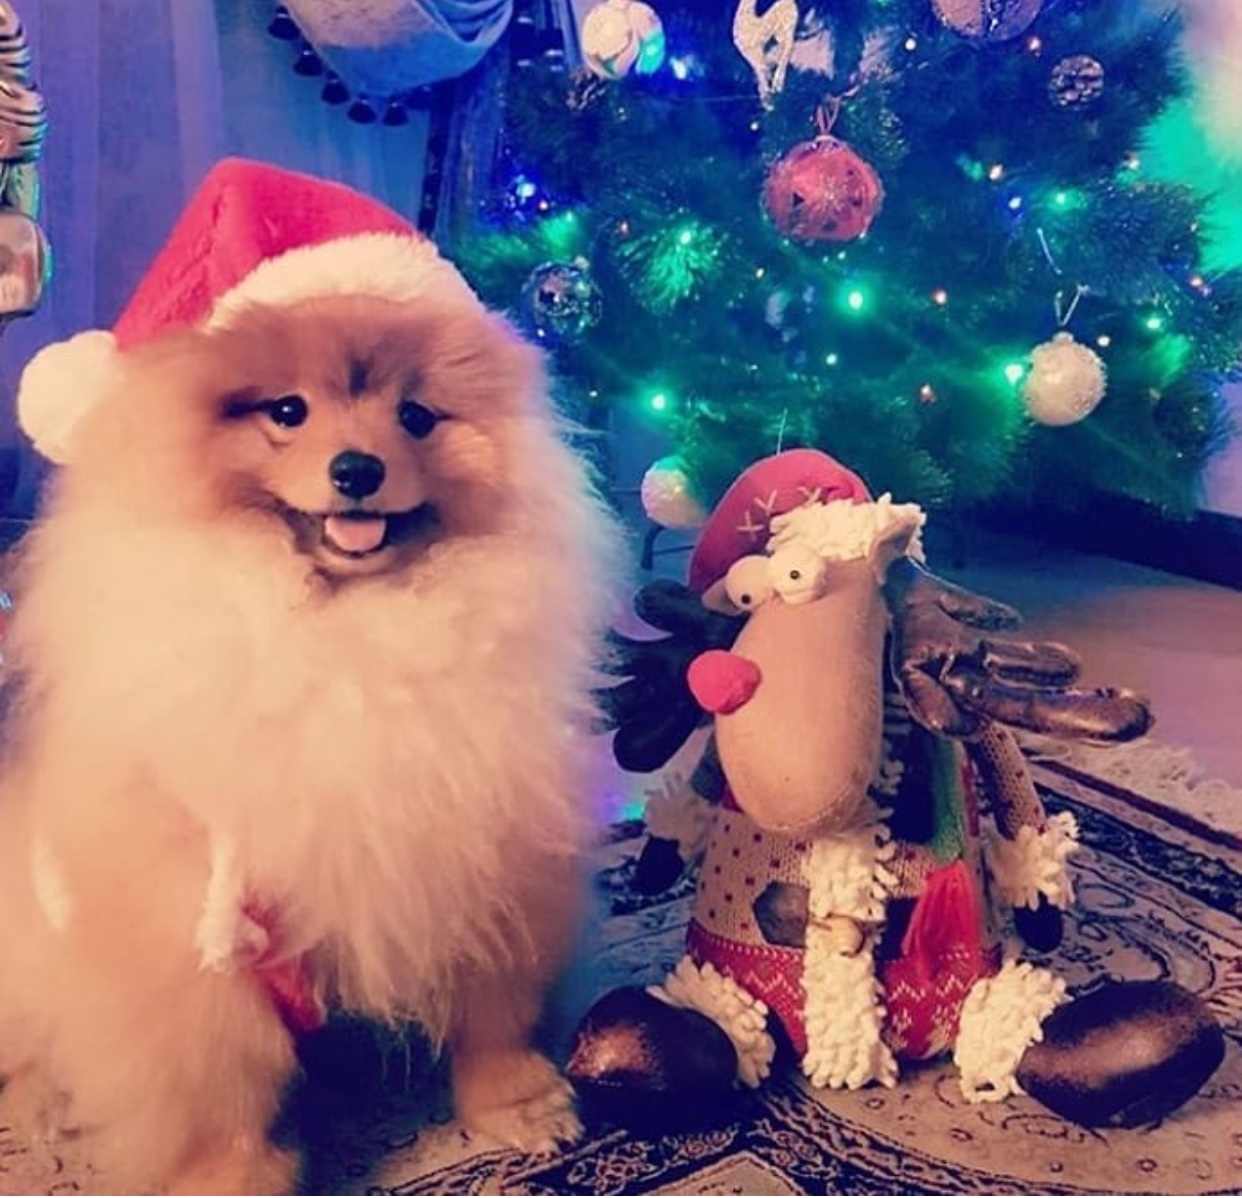 Pomeranian in christmas outfit beside a reindeer stuffed toy